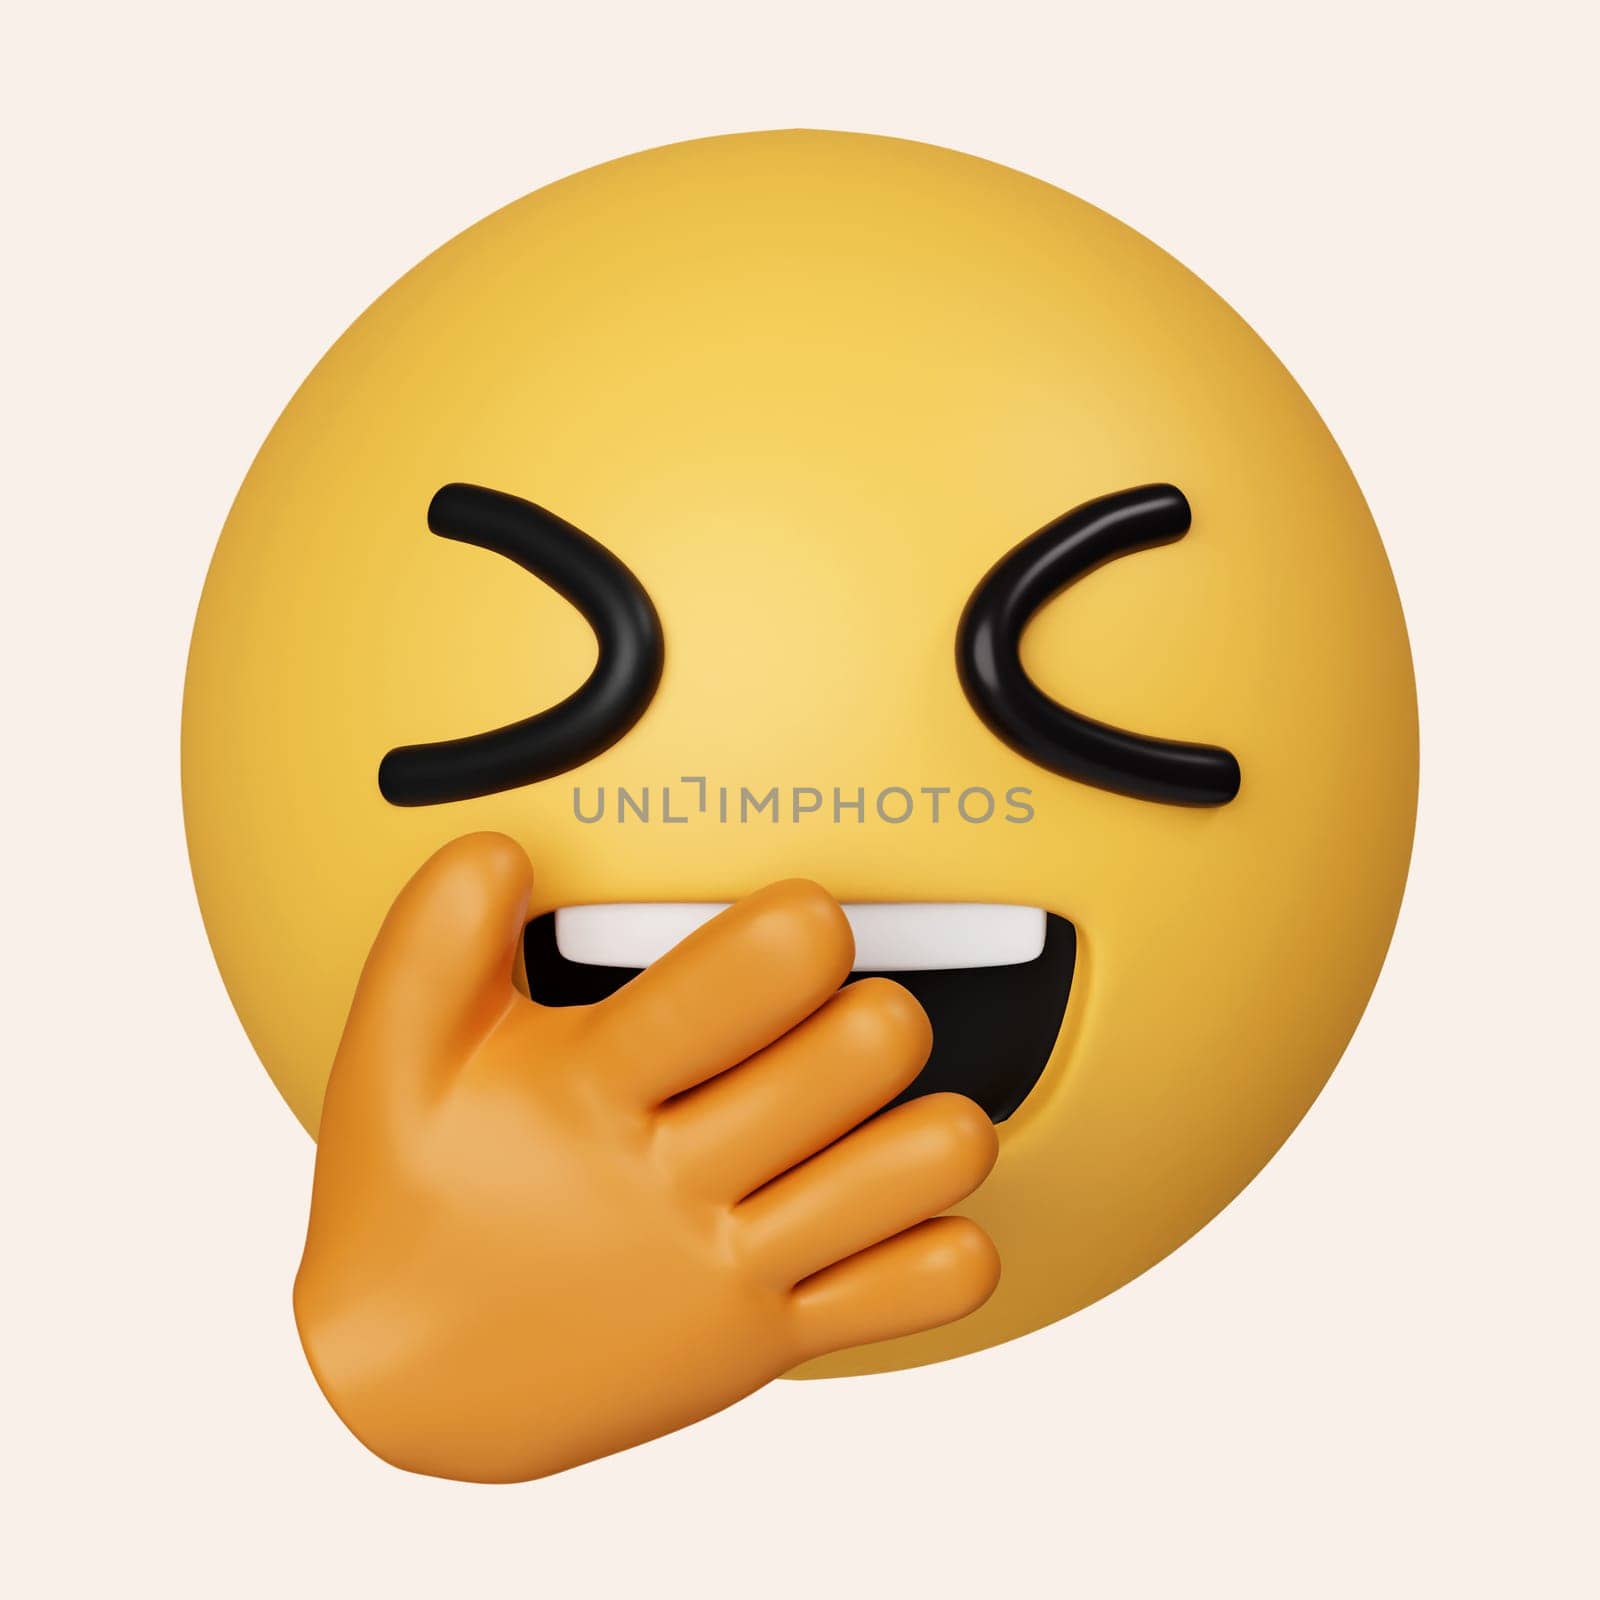 3d Chuckle Emoji. Emoticon cover mouth with hand while laughing. icon isolated on gray background. 3d rendering illustration. Clipping path. by meepiangraphic